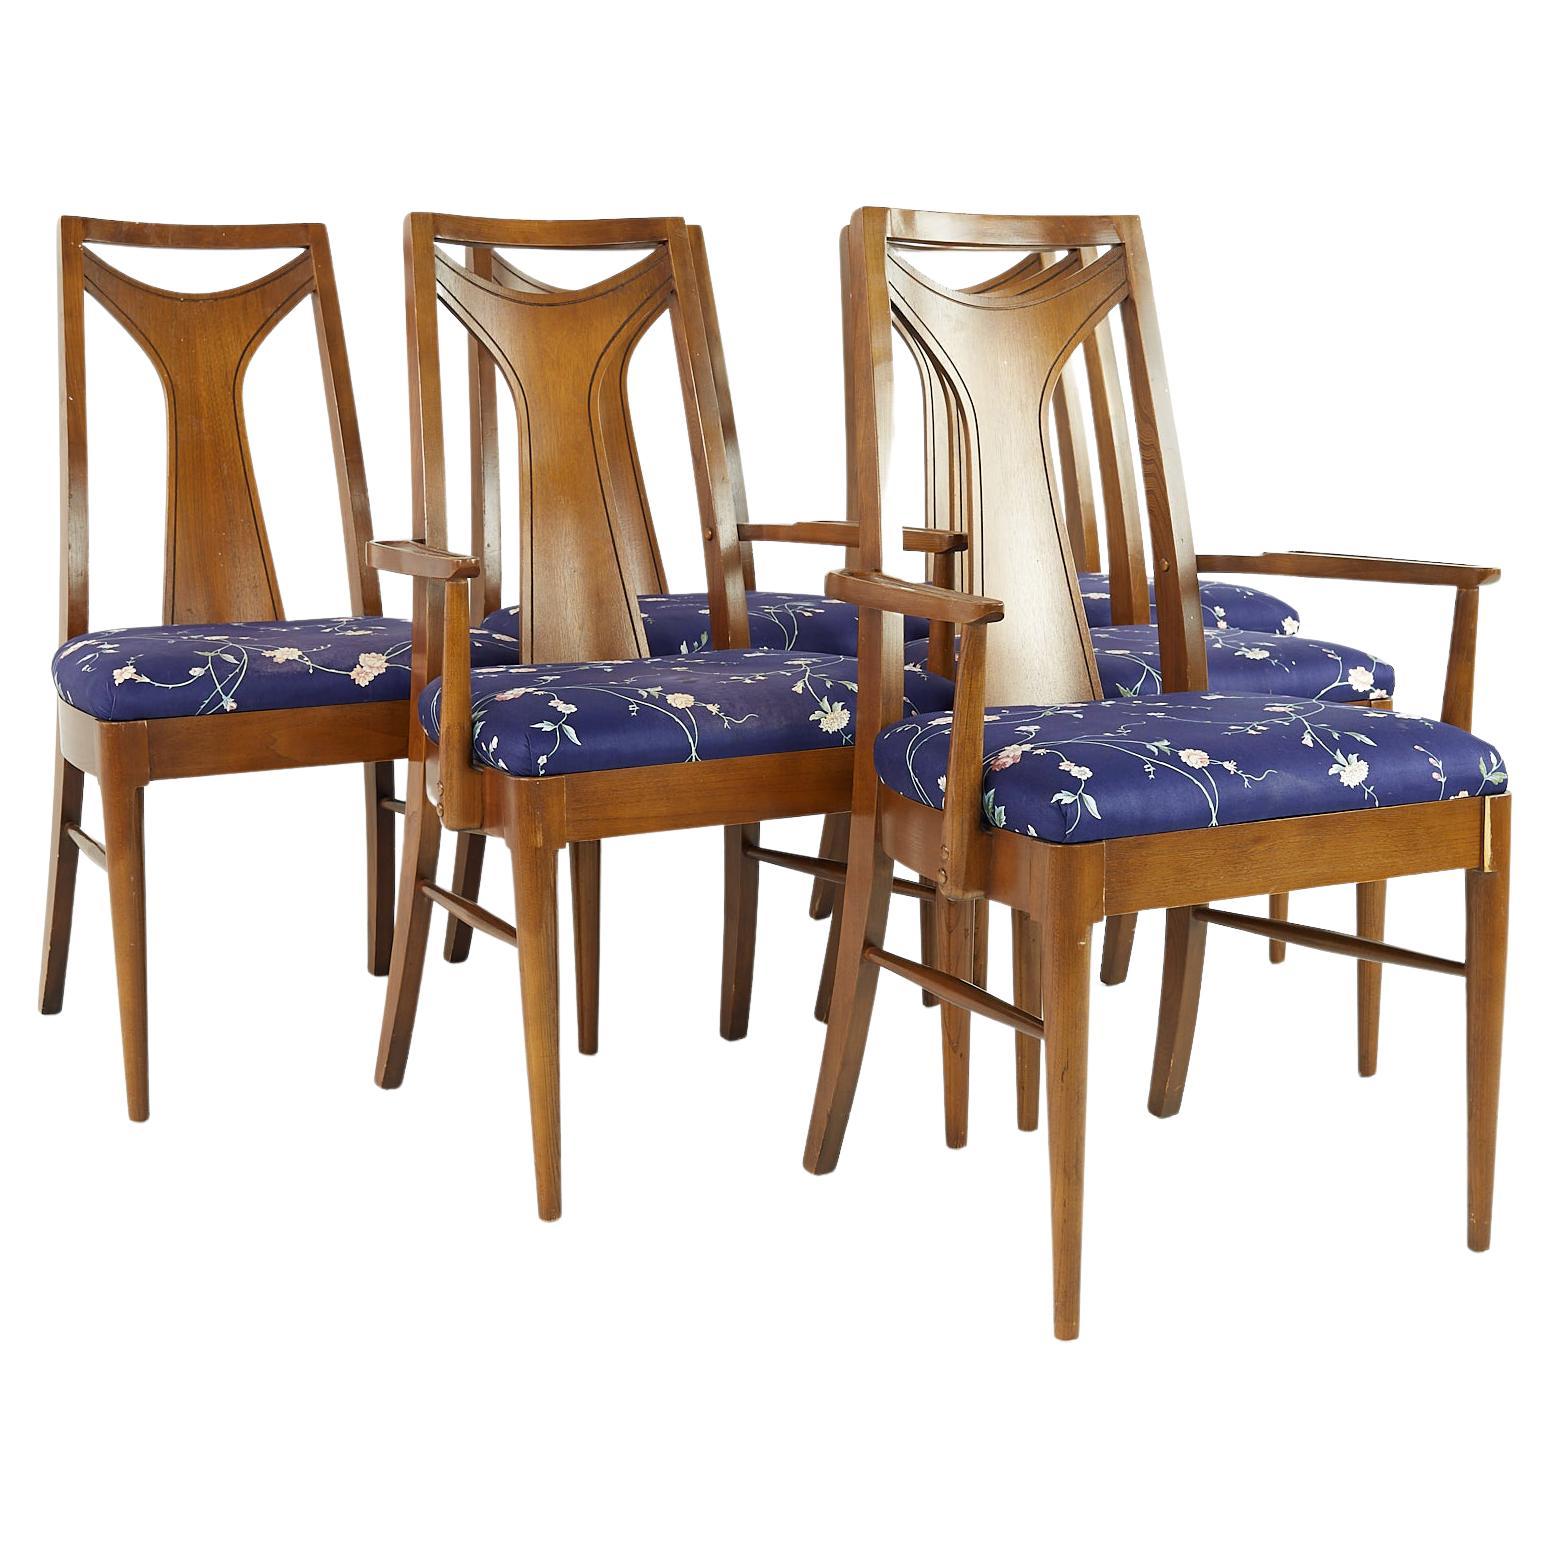 Kent Coffey Perspecta Mid Century Walnut Dining Chairs, Set of 6 For Sale